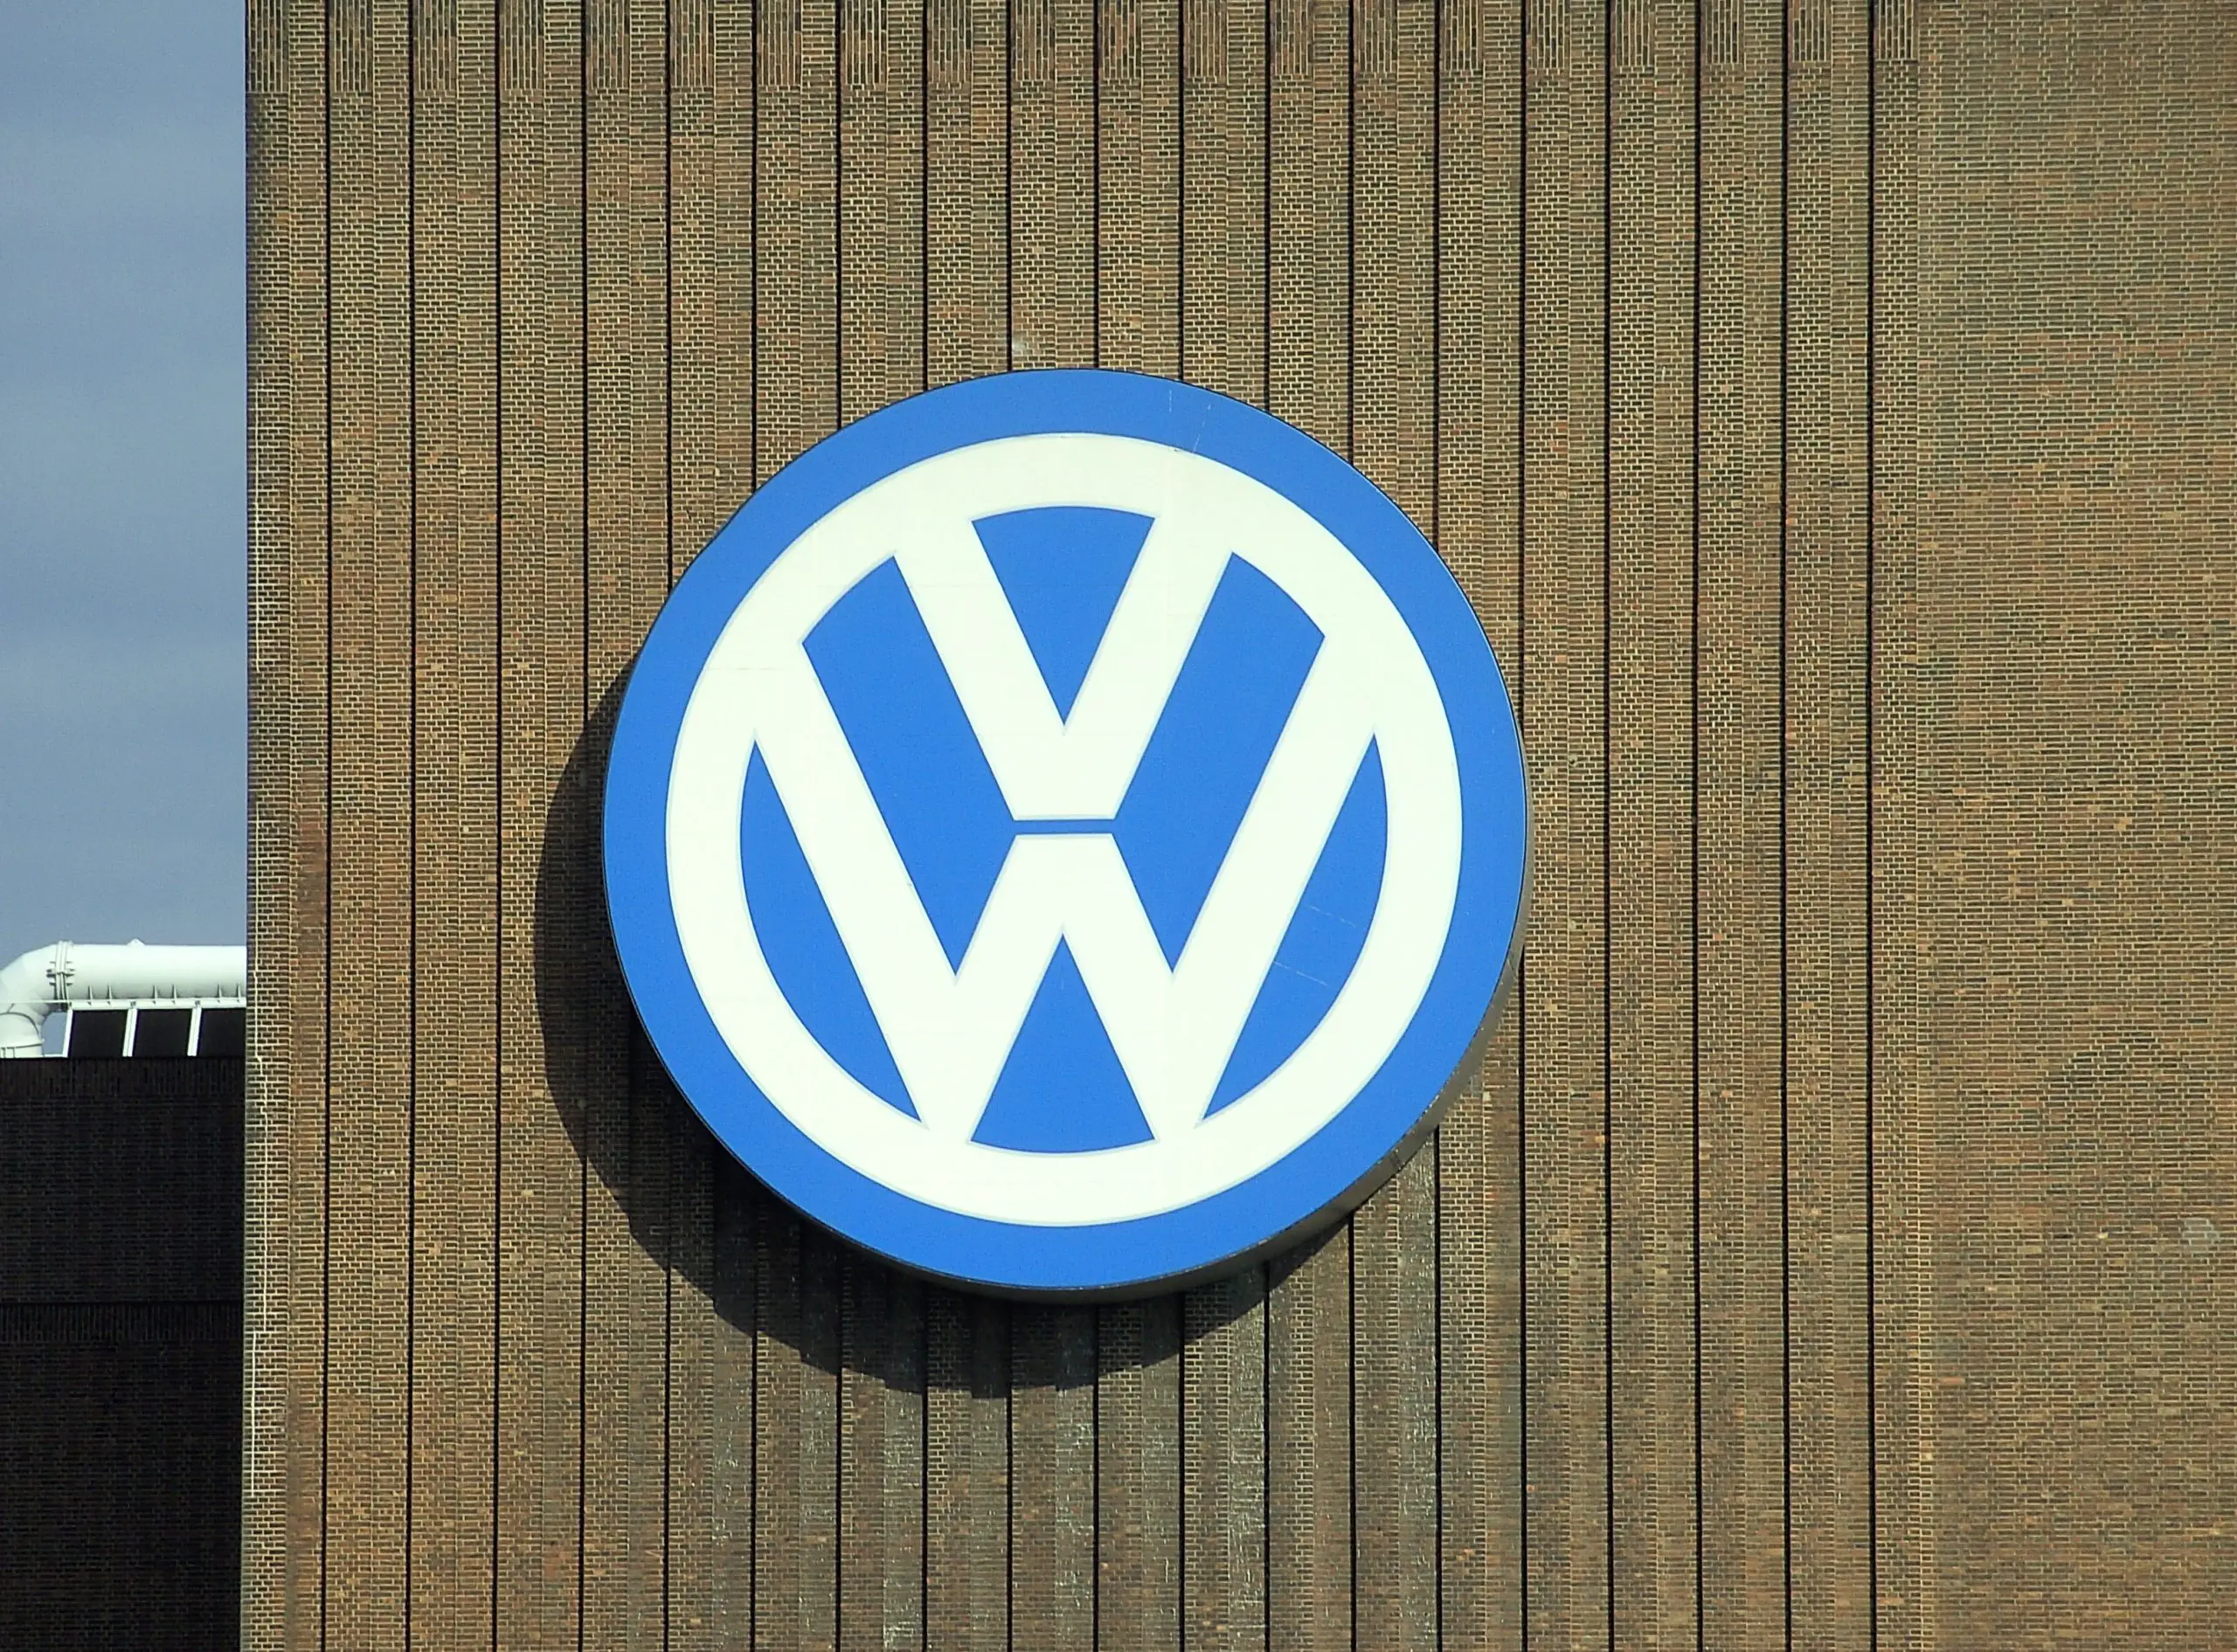 What Brands Does Volkswagen Own?